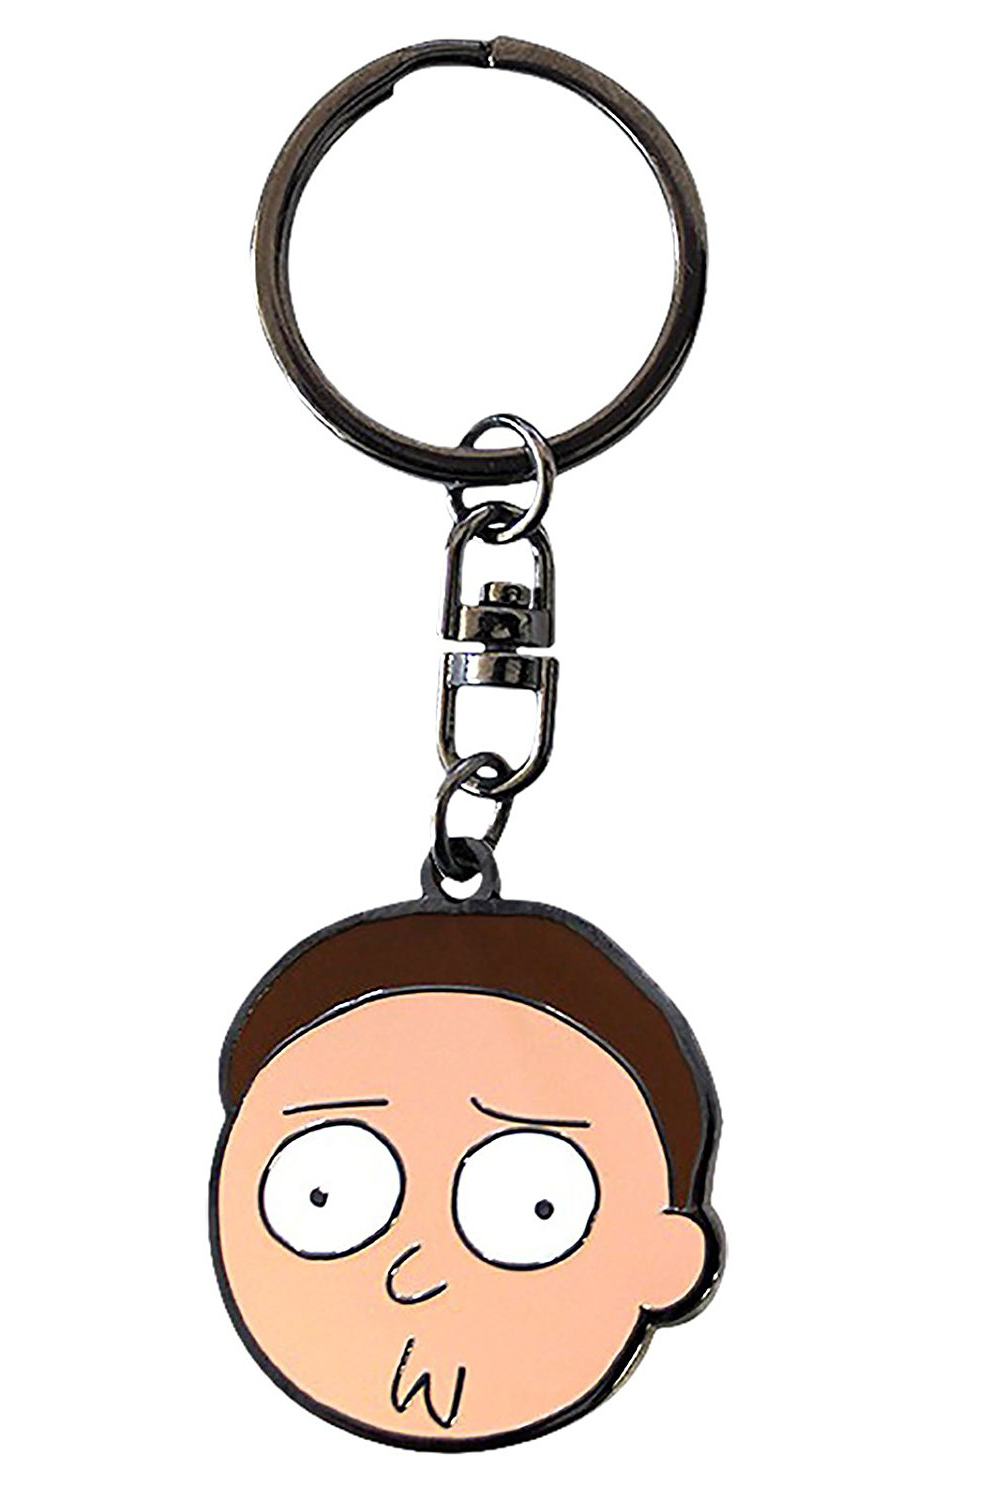 Rick and Morty - Morty Keychain